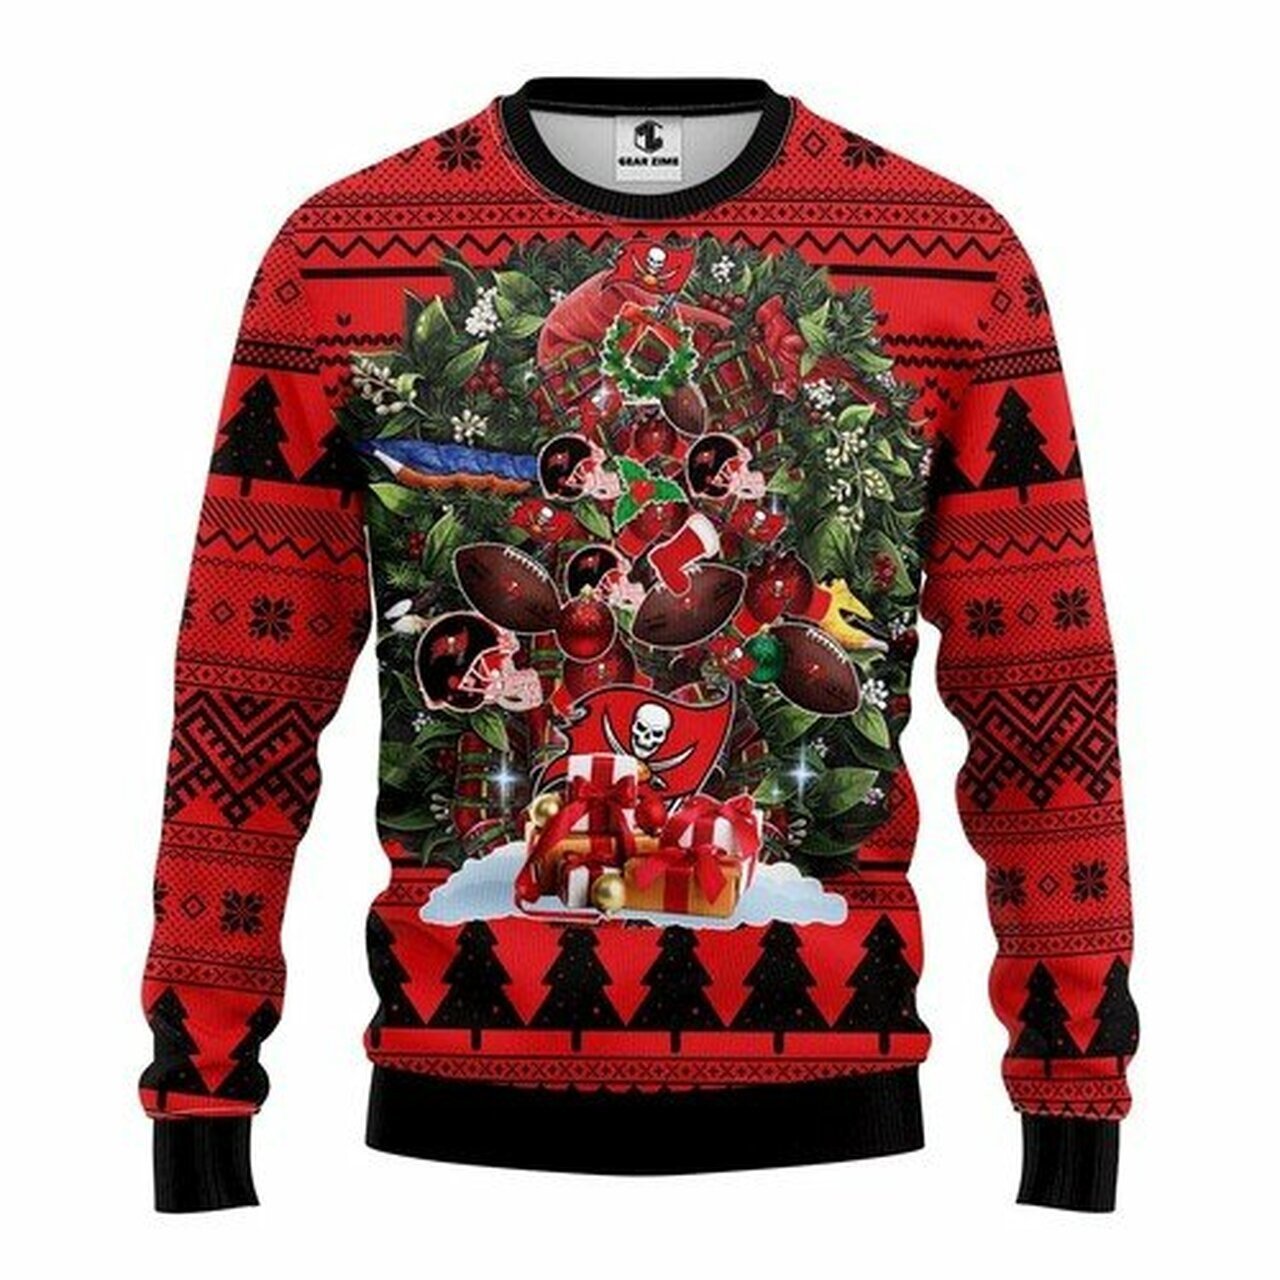 [ COOL ] NFL Tampa Bay Buccaneers christmas tree ugly sweater – Saleoff 291221